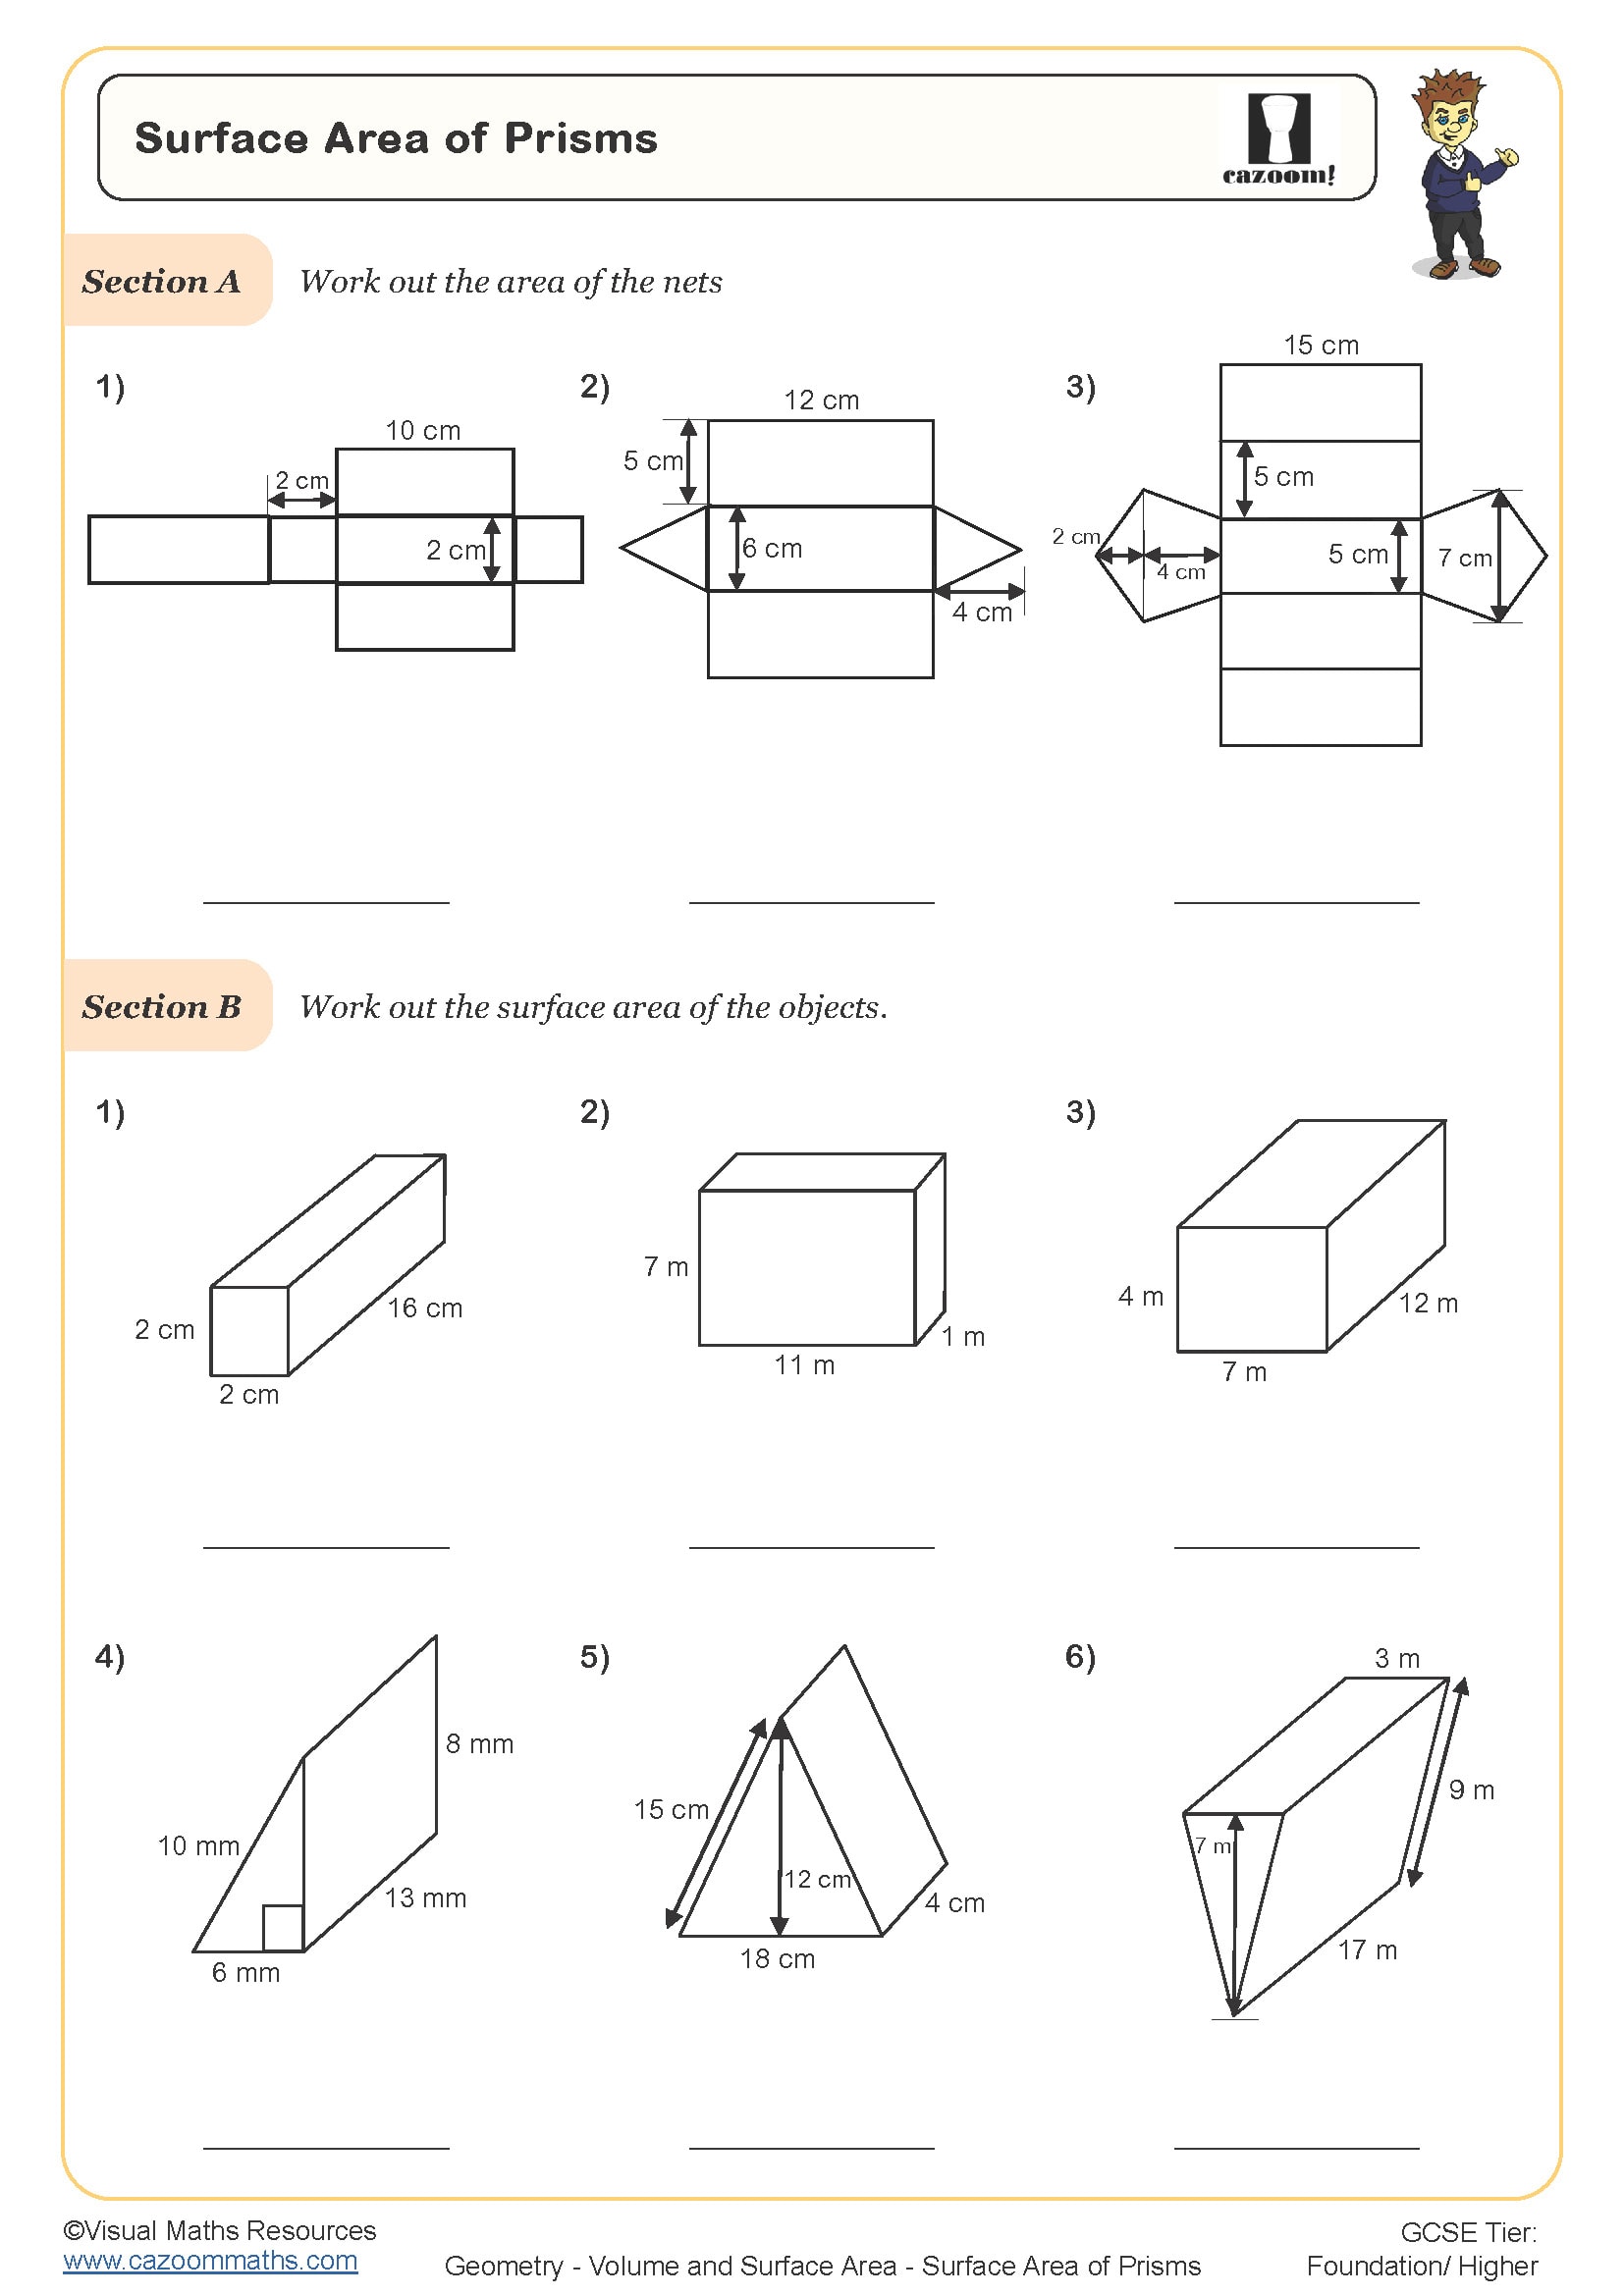 Surface Area of Prisms Worksheet fit for students in year 7 and year 8